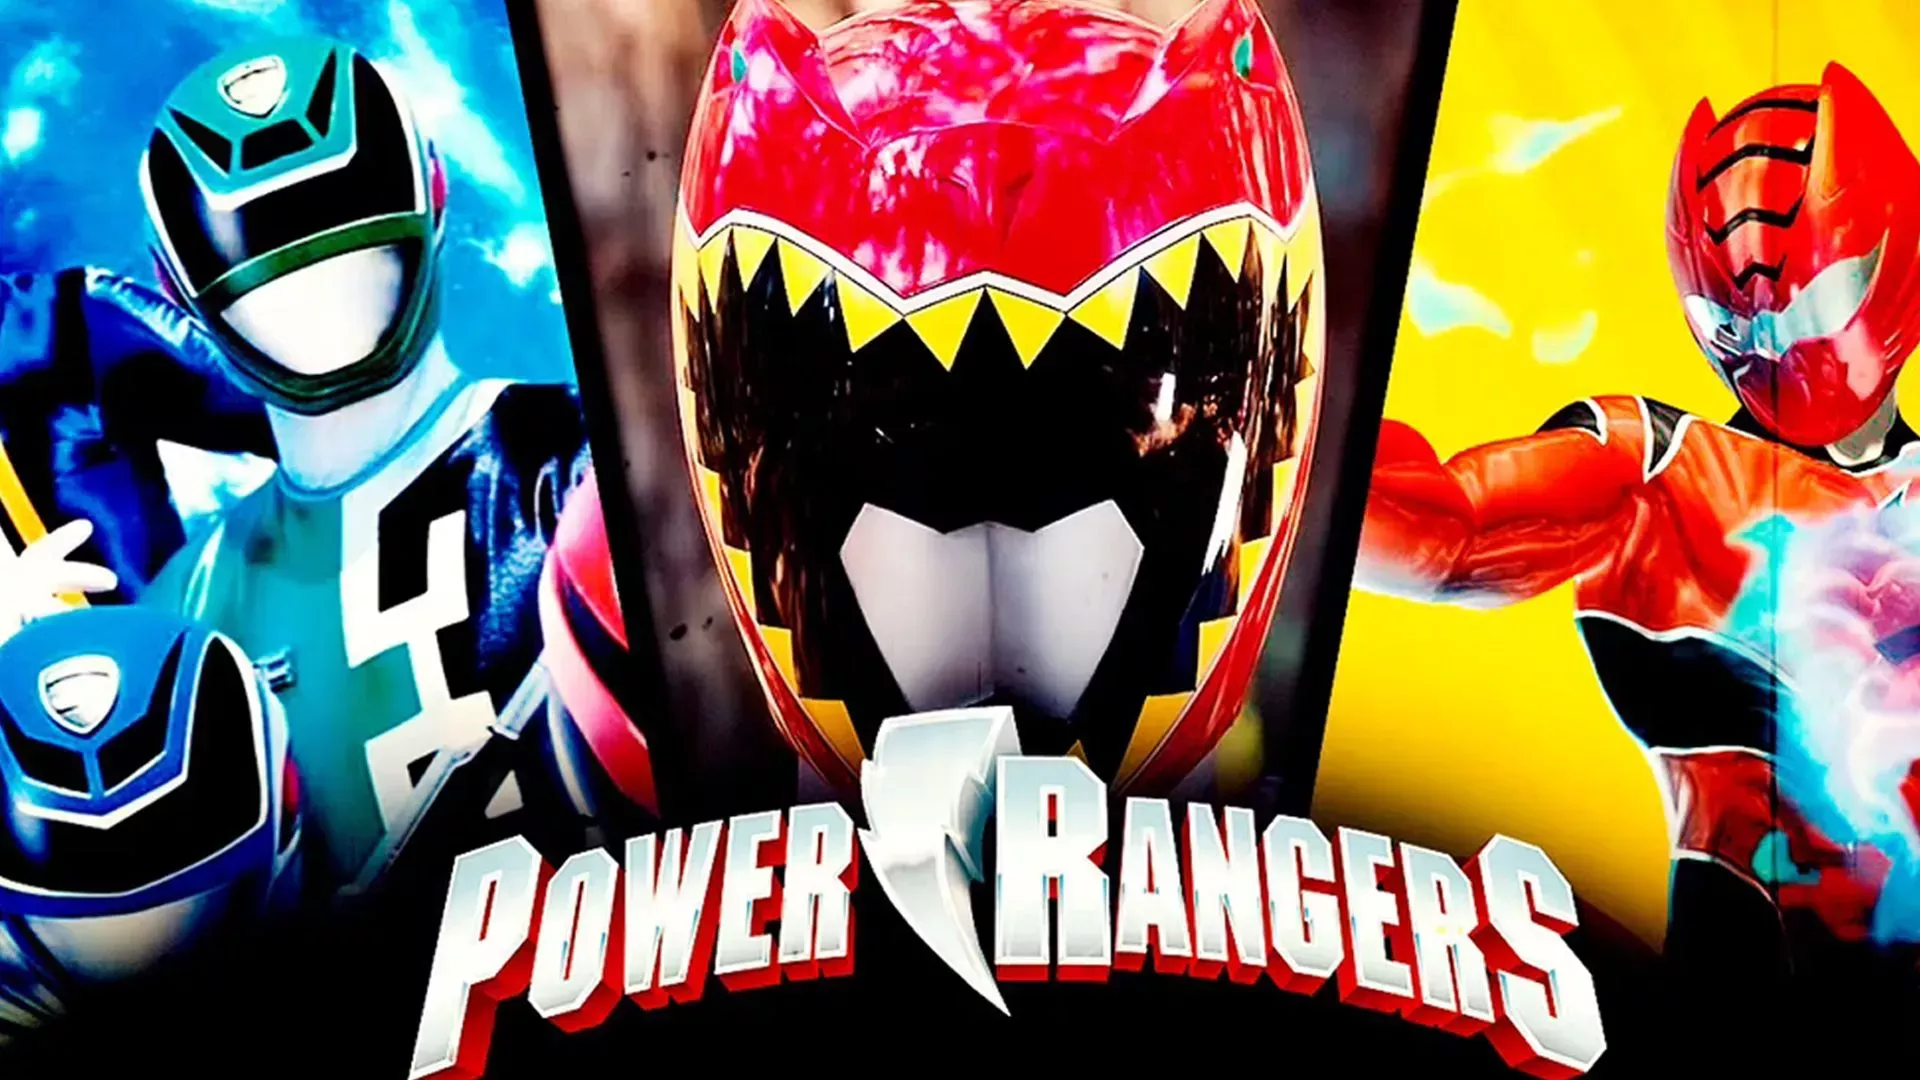 10 Longest Morphin Sequences in Power Rangers, Ranked 